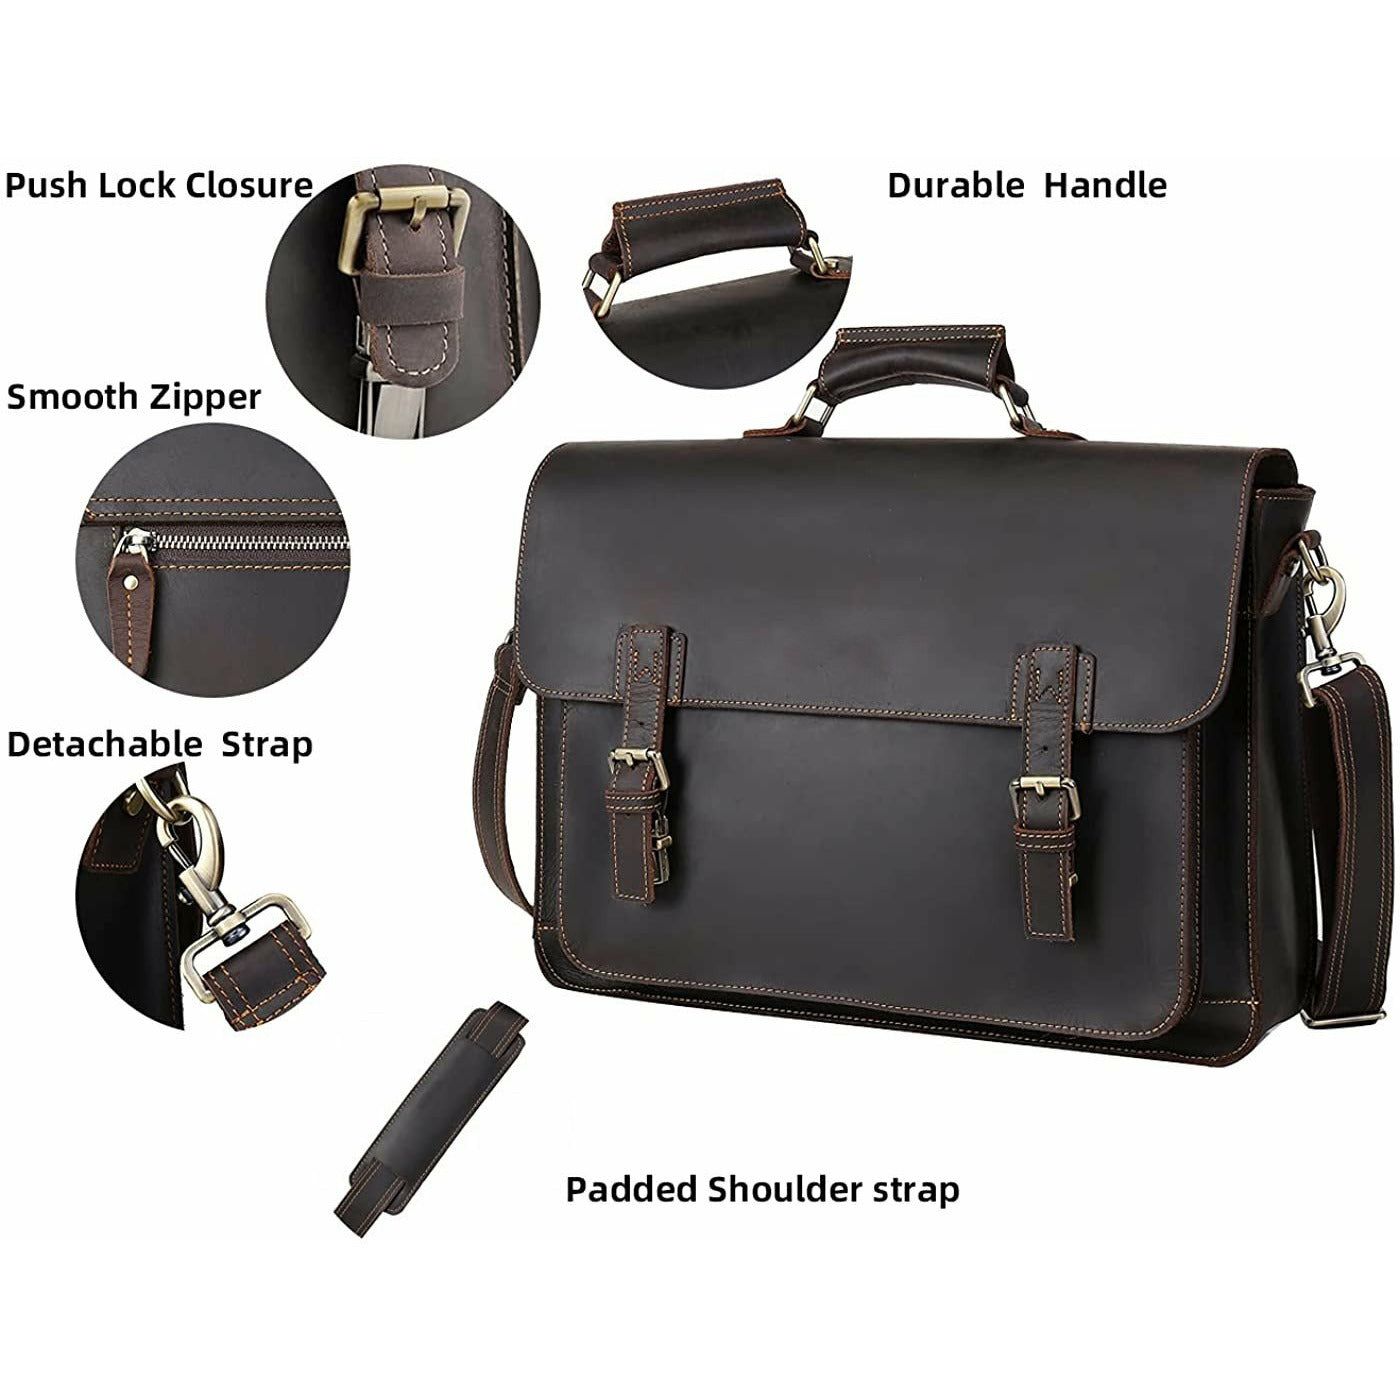 CONTACT'S Genuine Leather Briefcase Men's Bag Password